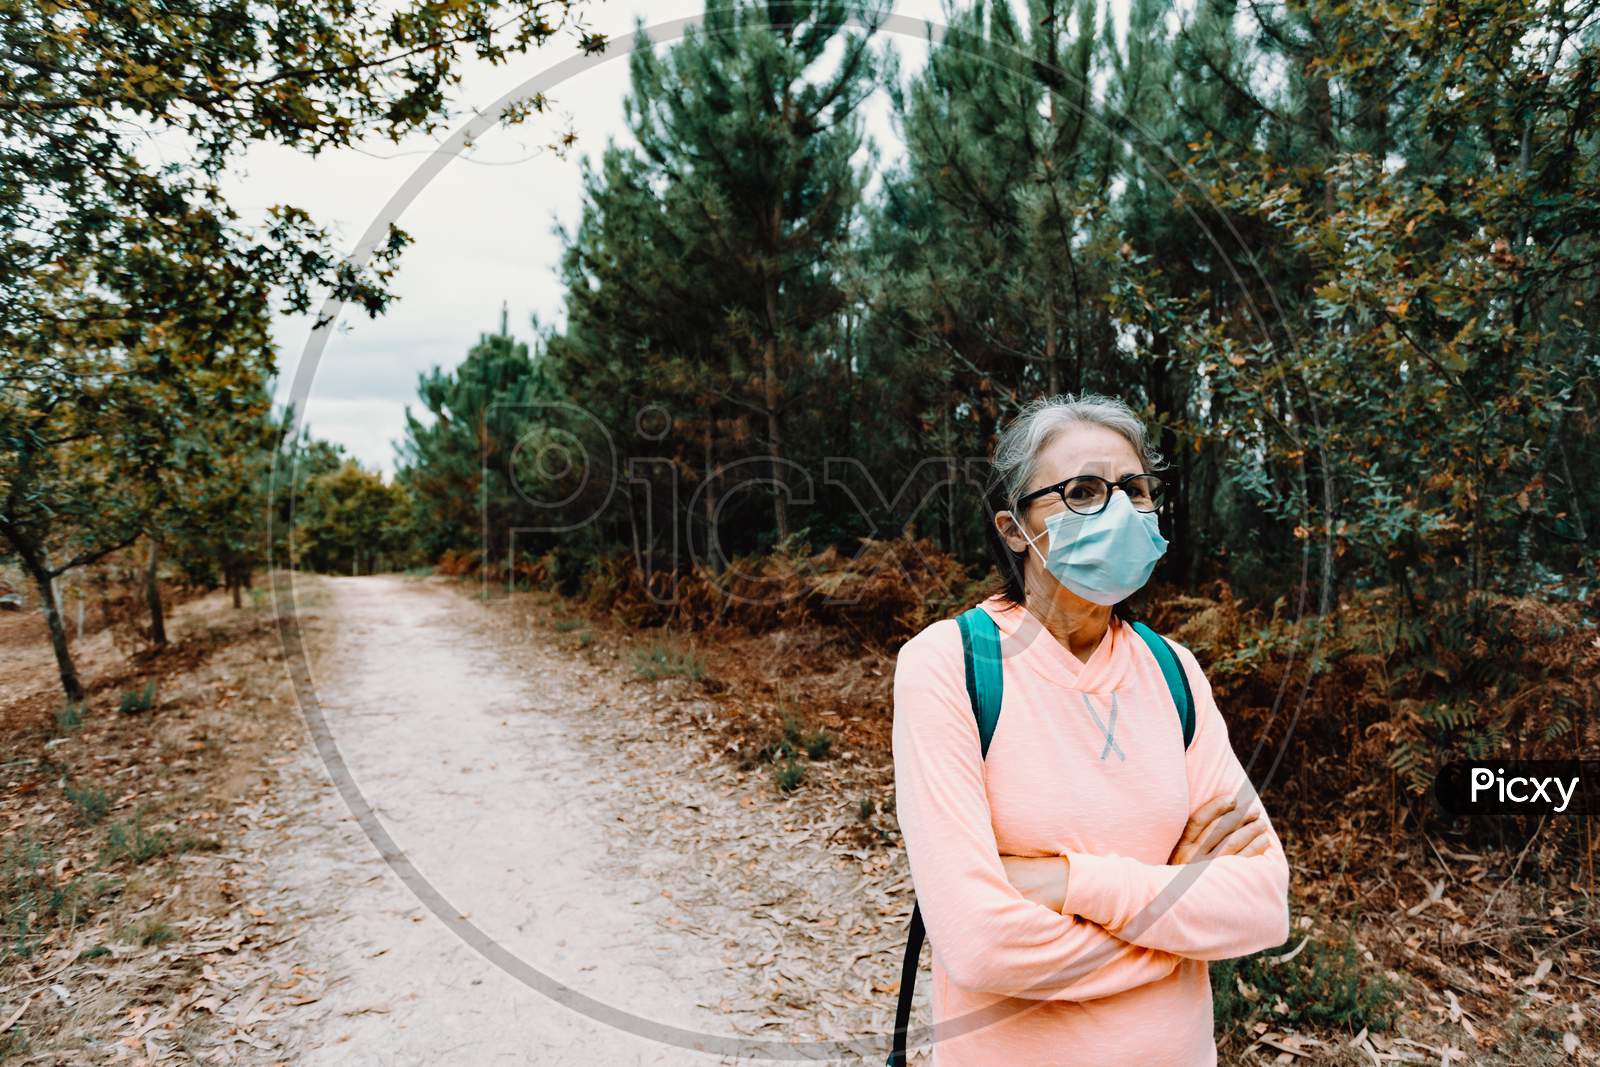 Old Woman Crossing Arms While Wearing A Mask In The Middle Of A Forest With Copy Space